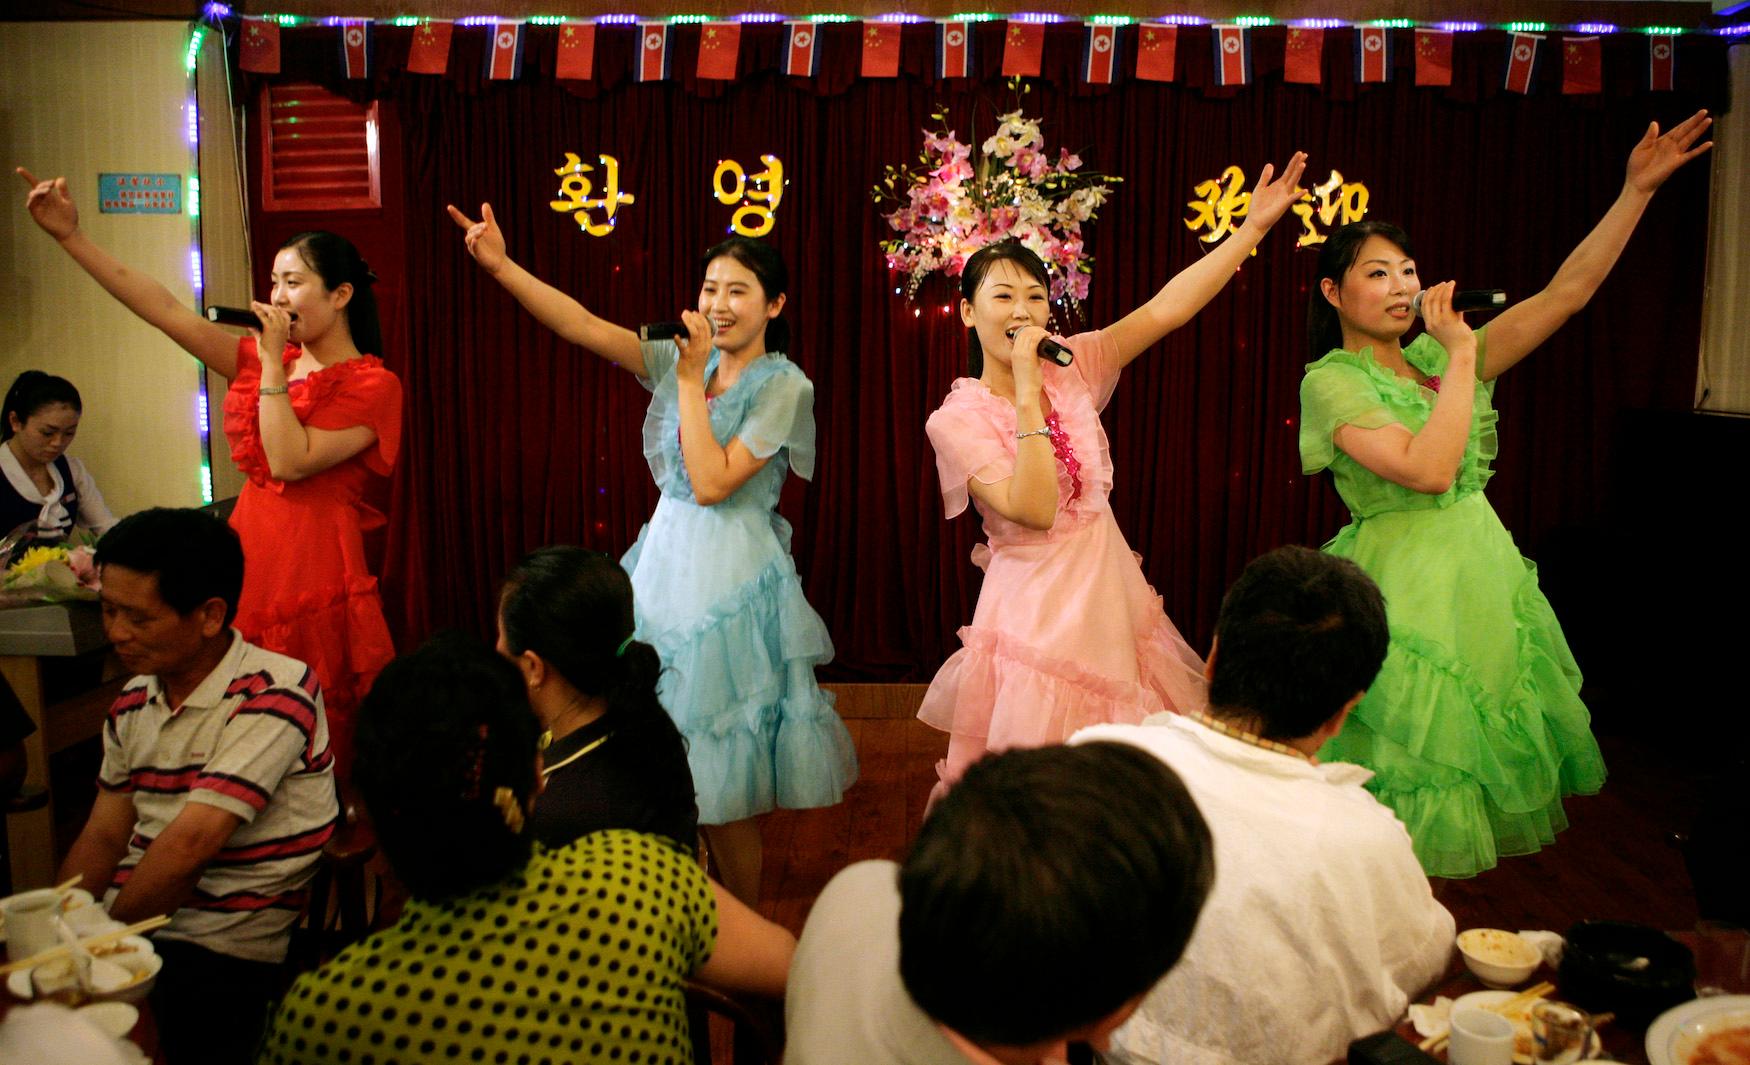 Singing waitresses entertain crowds at a North Korean restaurant in the Chinese border city of Dandong, on May 28, 2009.